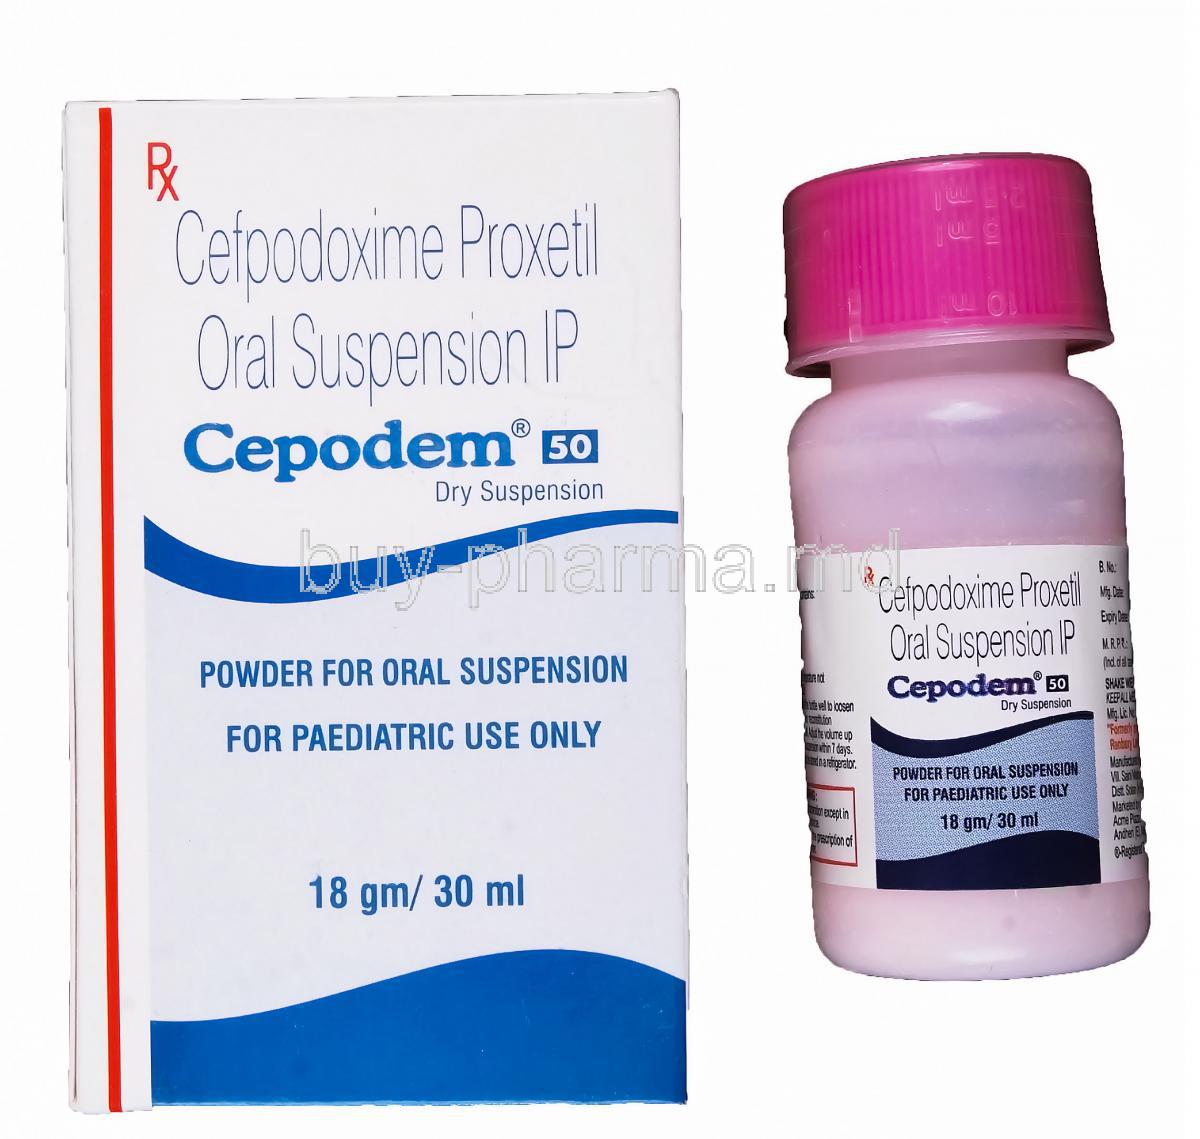 Promethazine with codeine for sale online